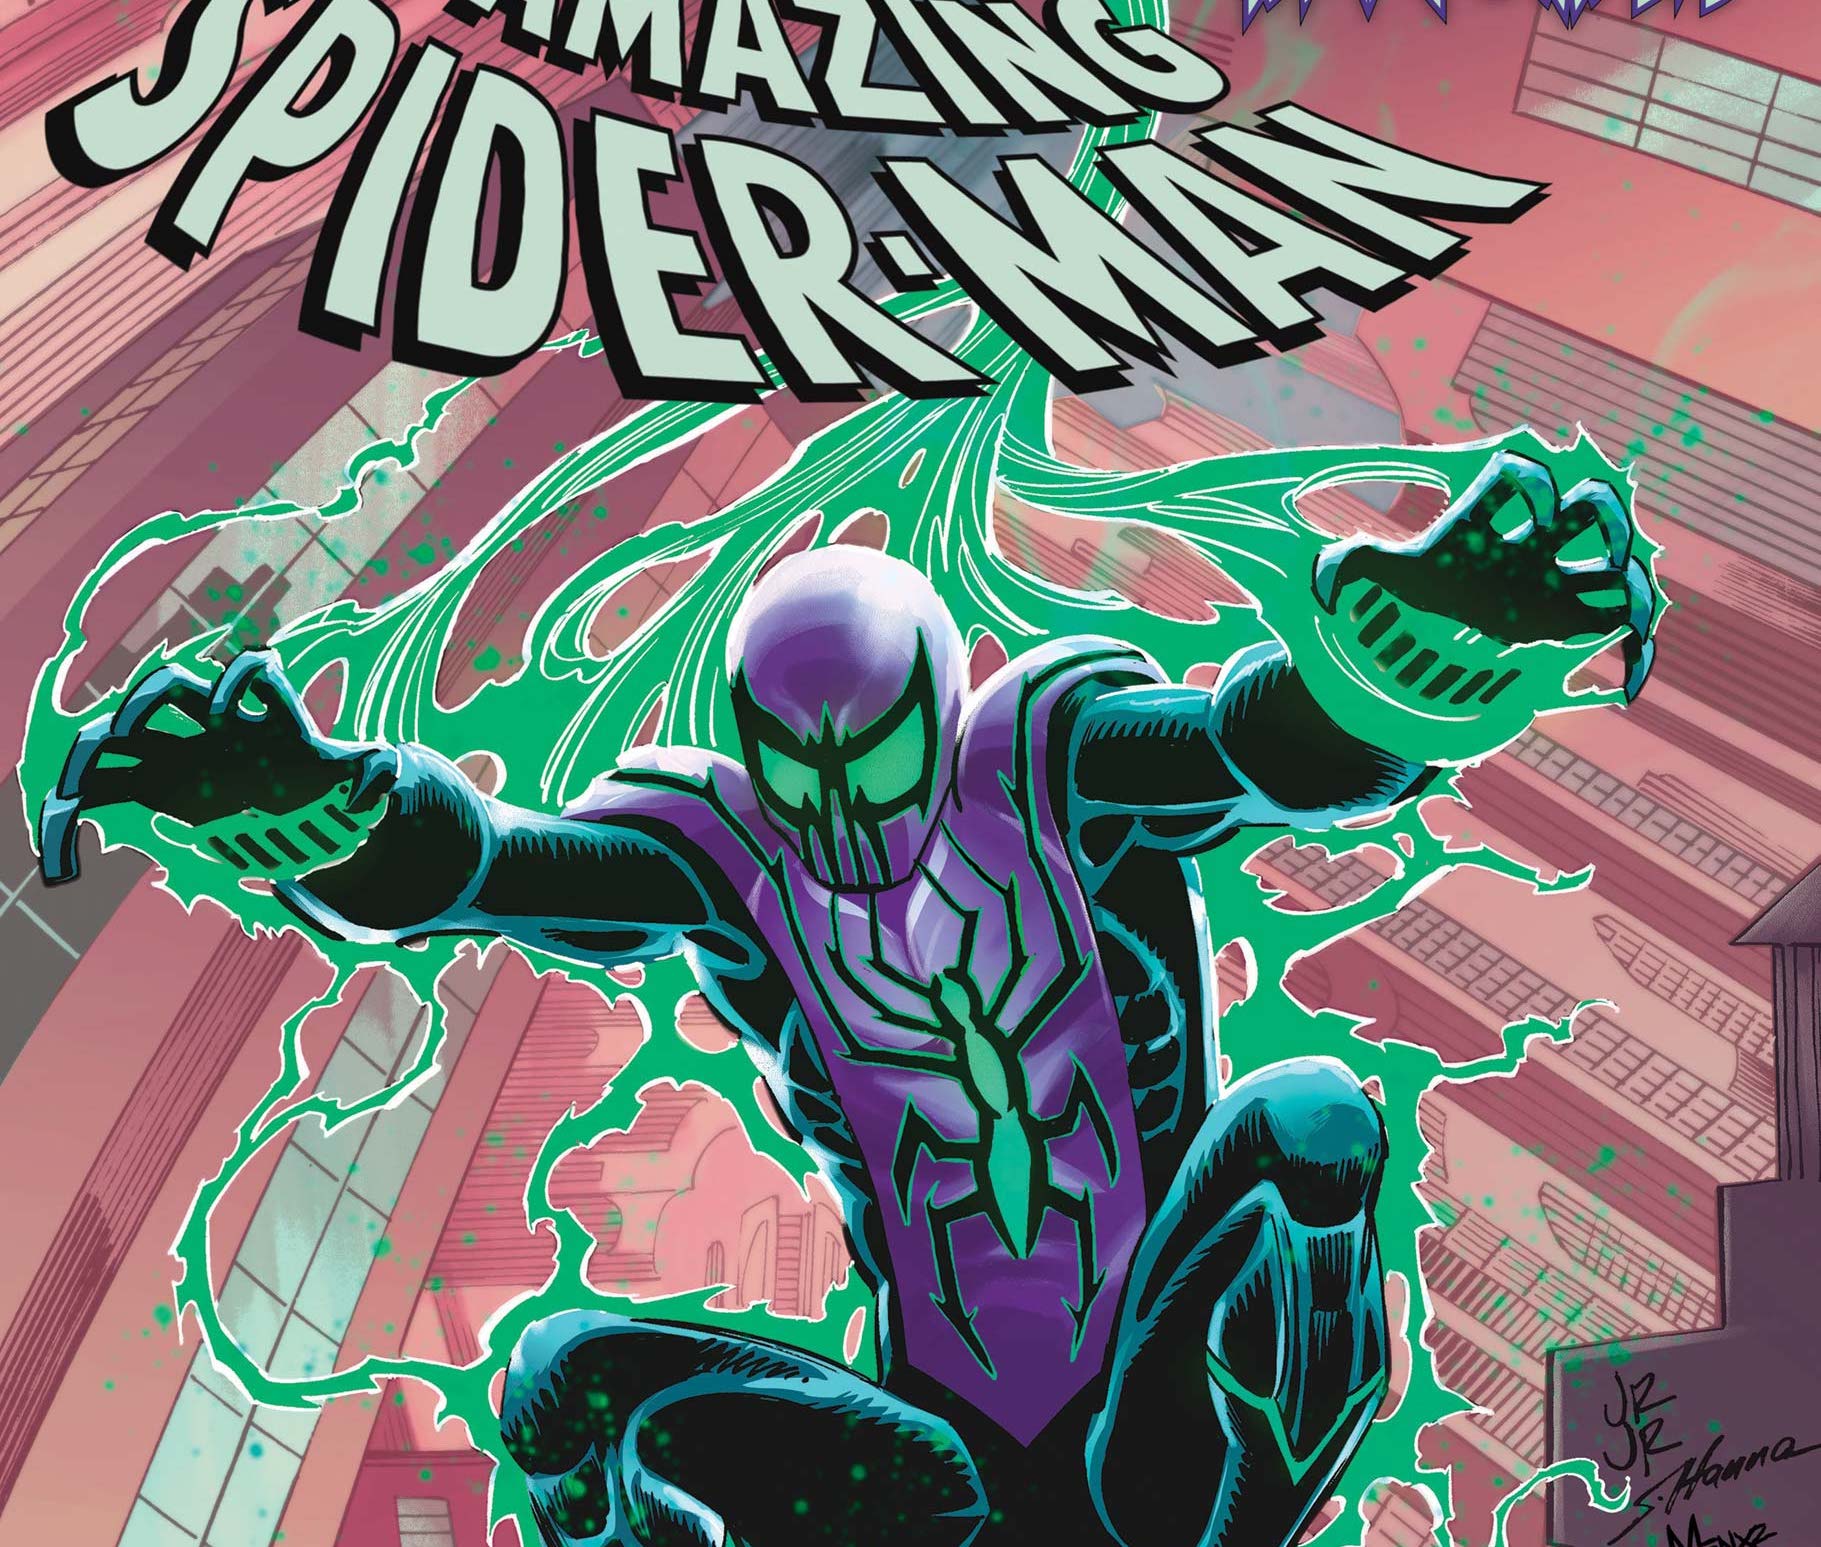 The Amazing Spider-Man (2022) #39, Comic Issues